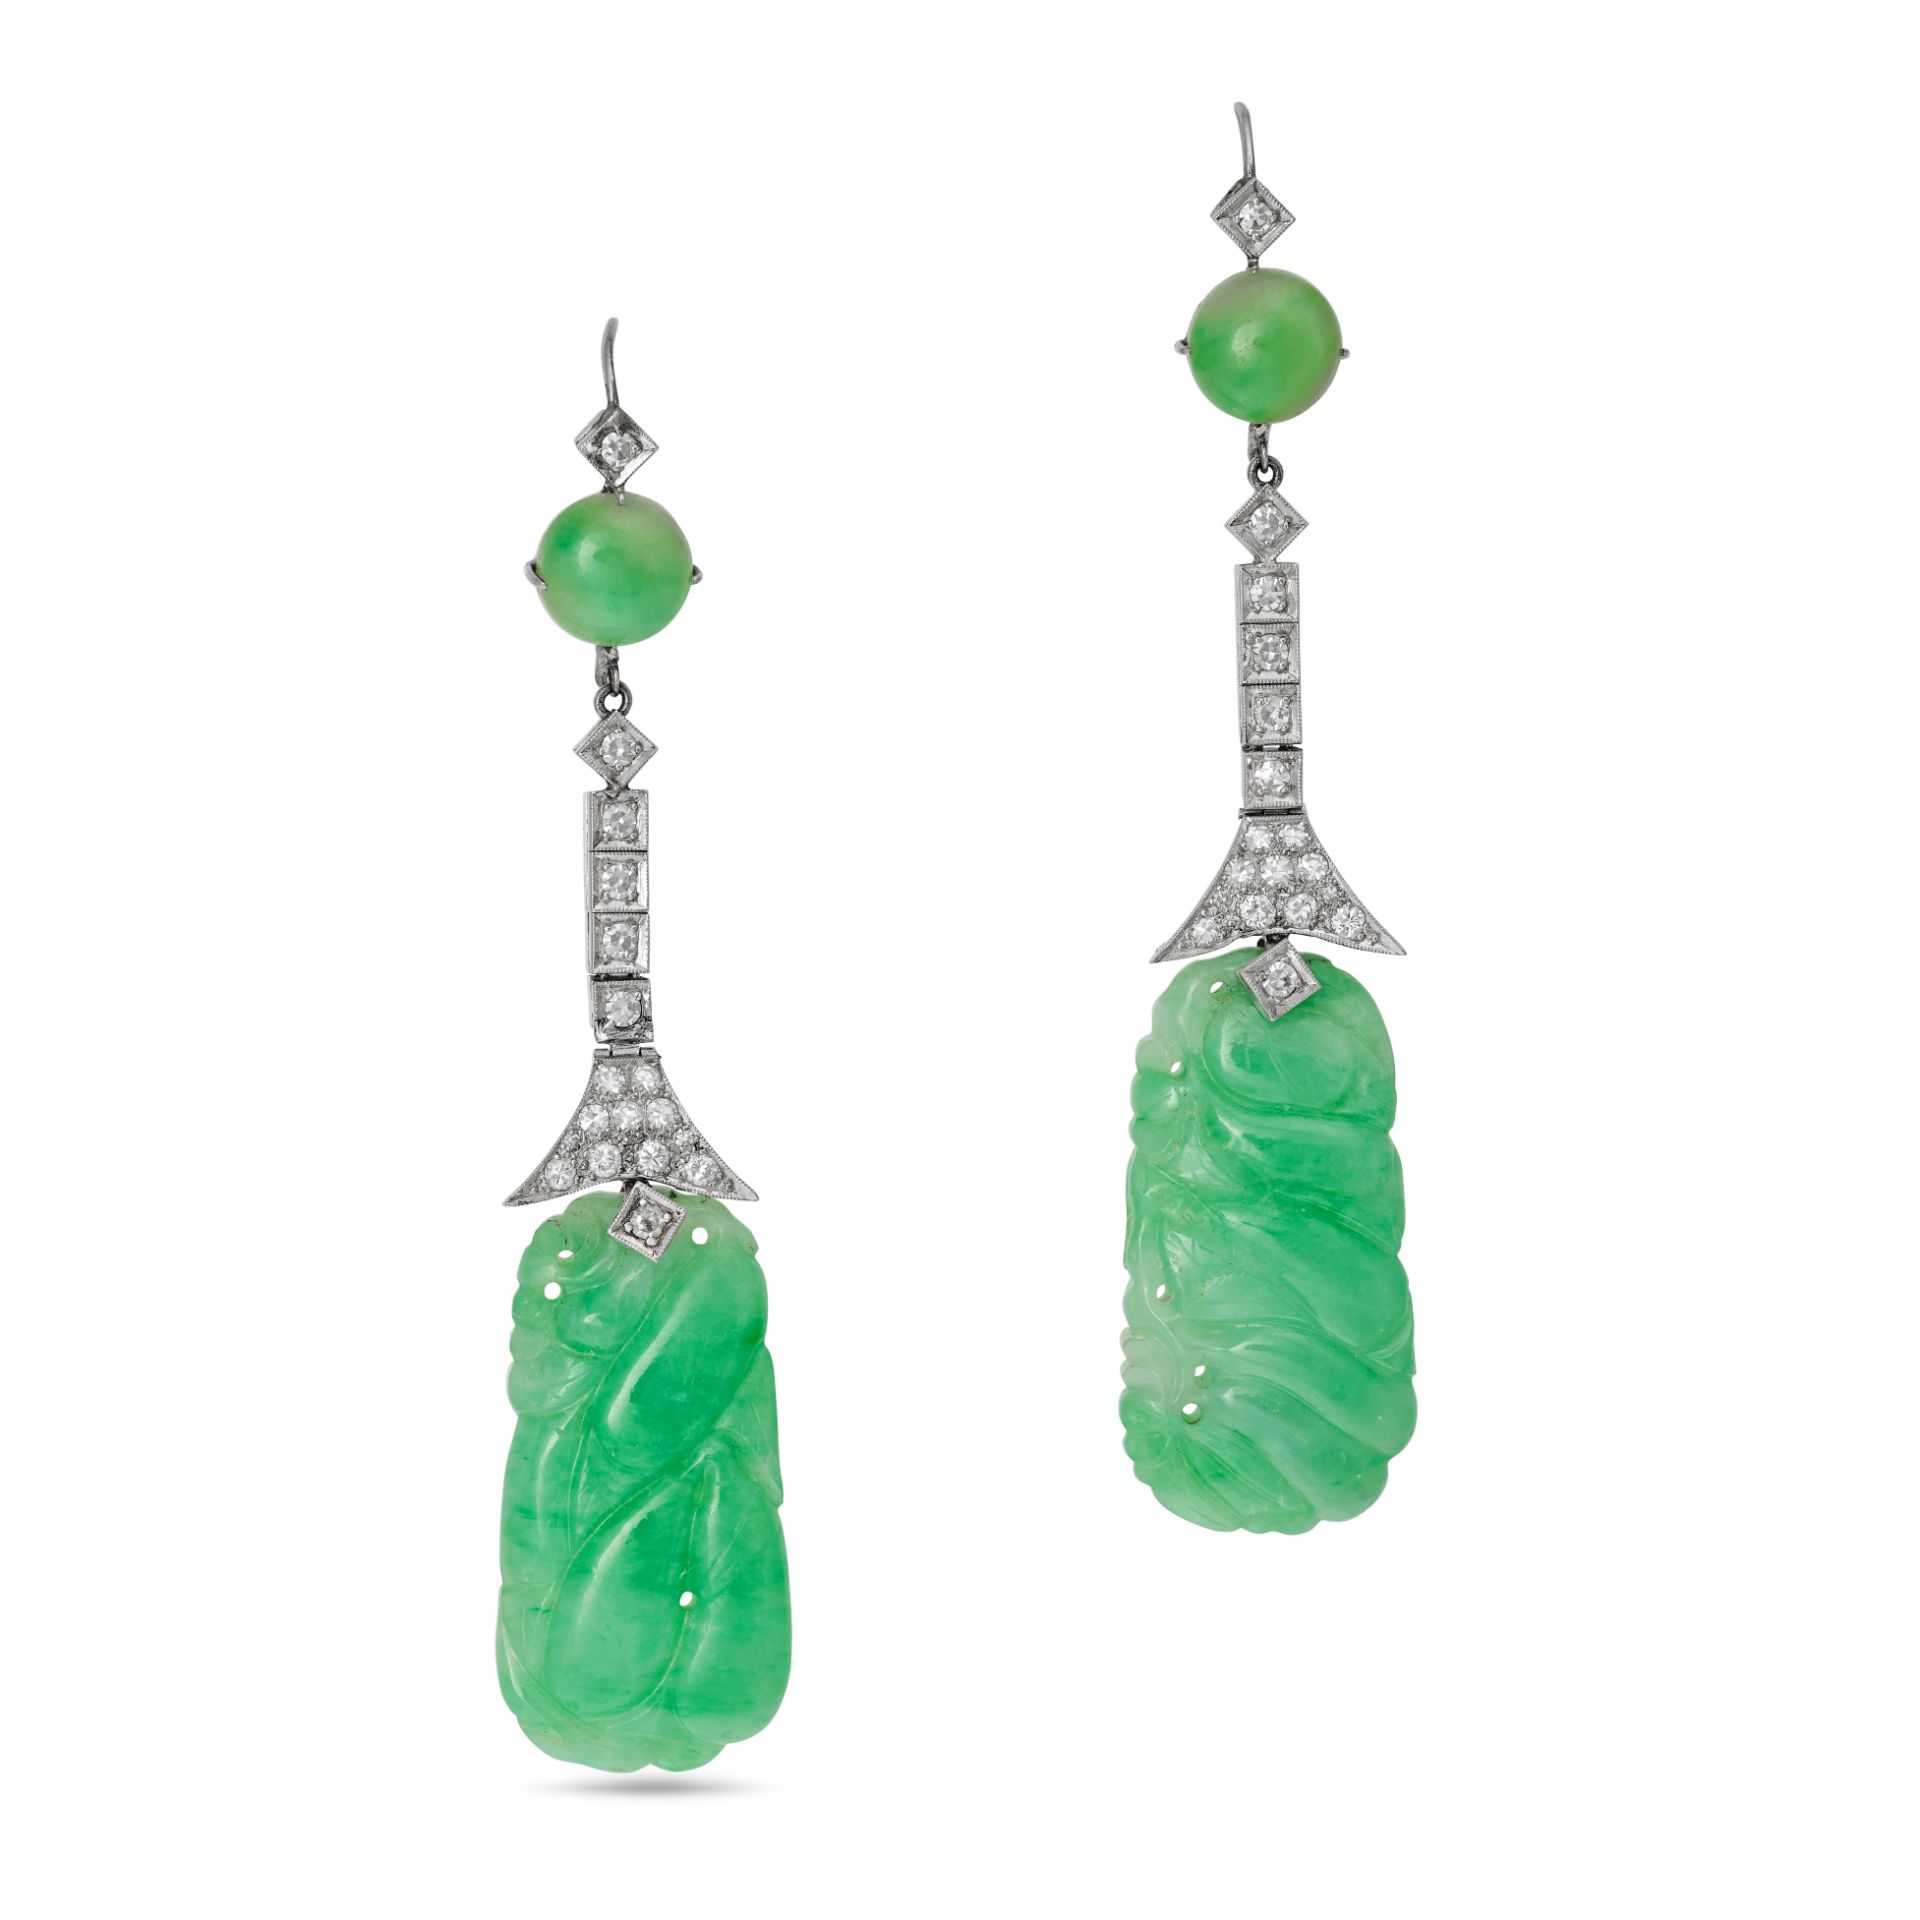 A PAIR OF JADEITE JADE AND DIAMOND DROP EARRINGS in white gold, each set with a cabochon jadeite ...